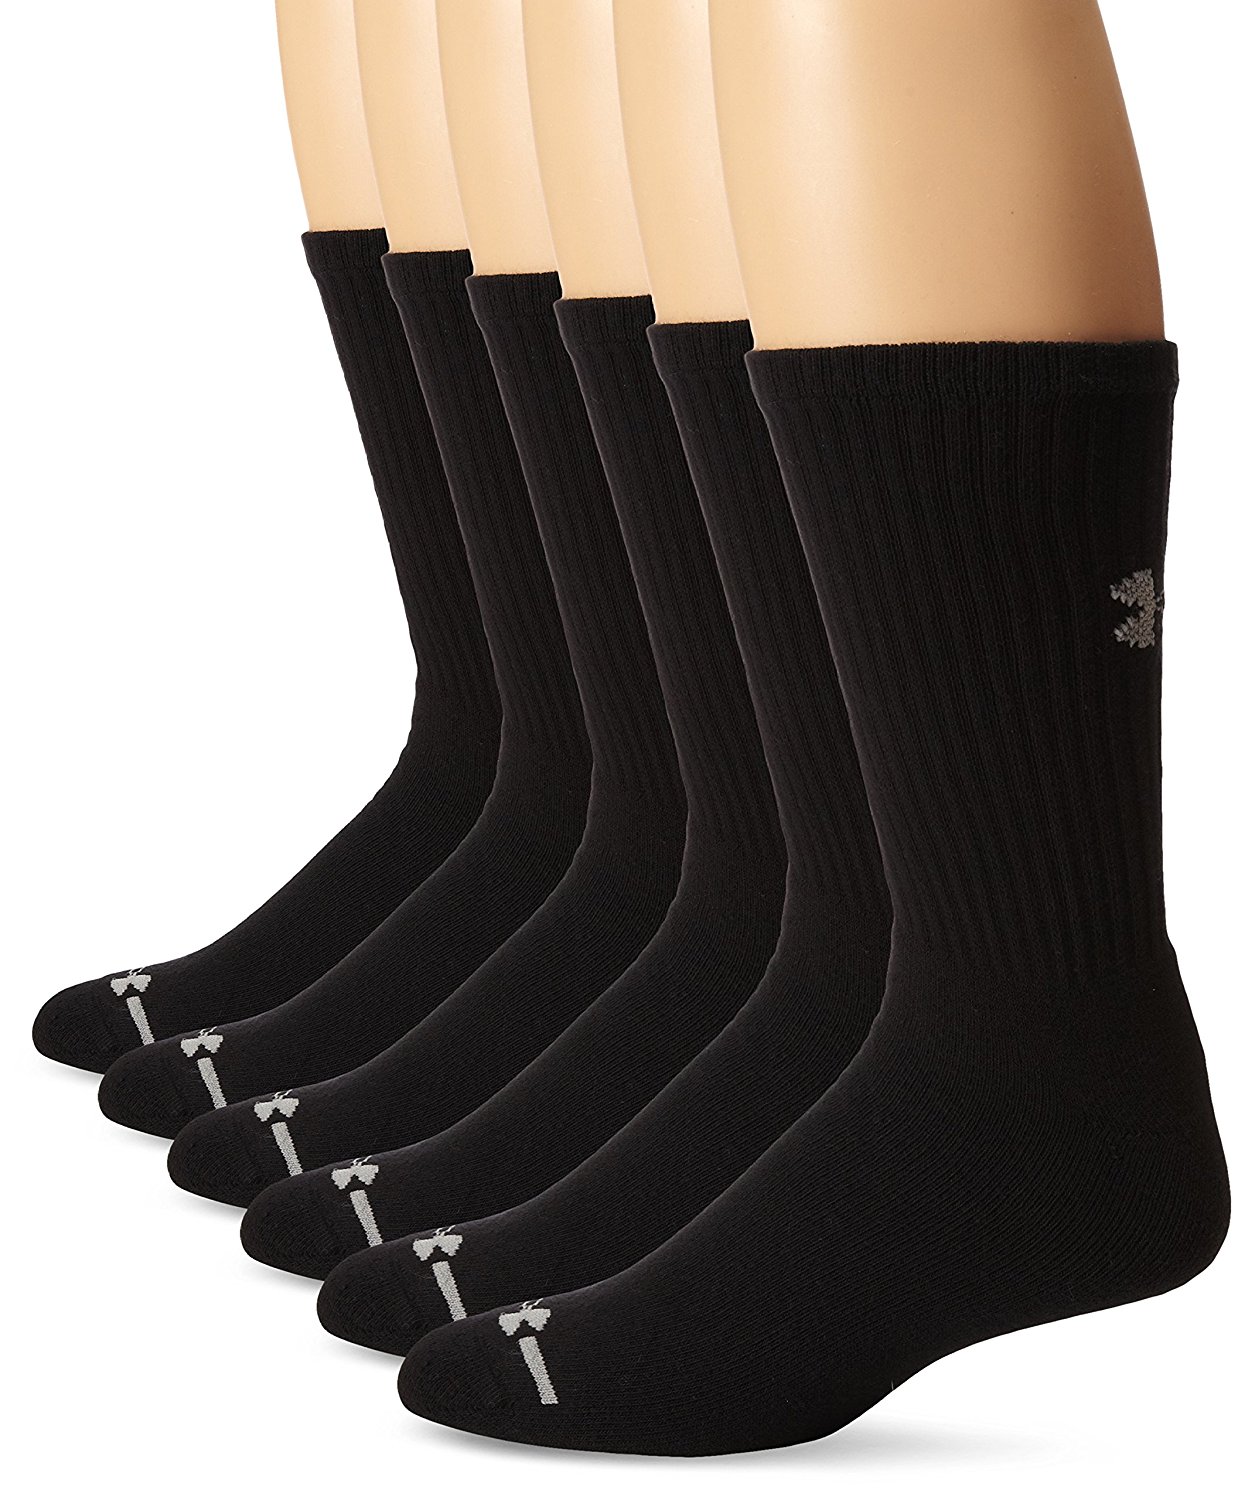 Under Armour Men's Charged Cotton Crew Socks 6-pack Only $9.98 ...